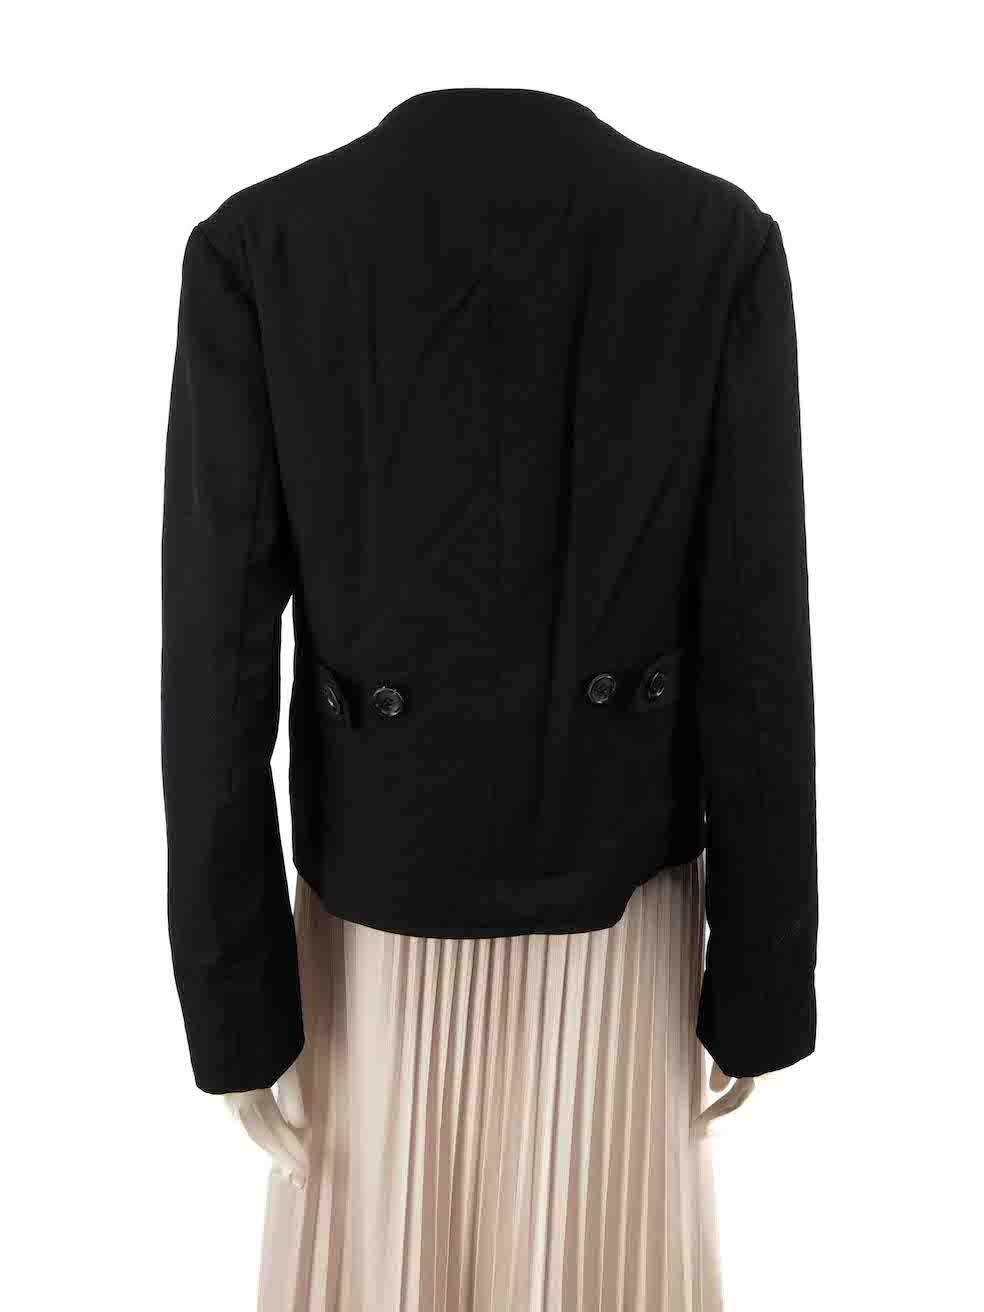 Yohji Yamamoto Black Double Breasted Cropped Blazer Size M In Good Condition For Sale In London, GB